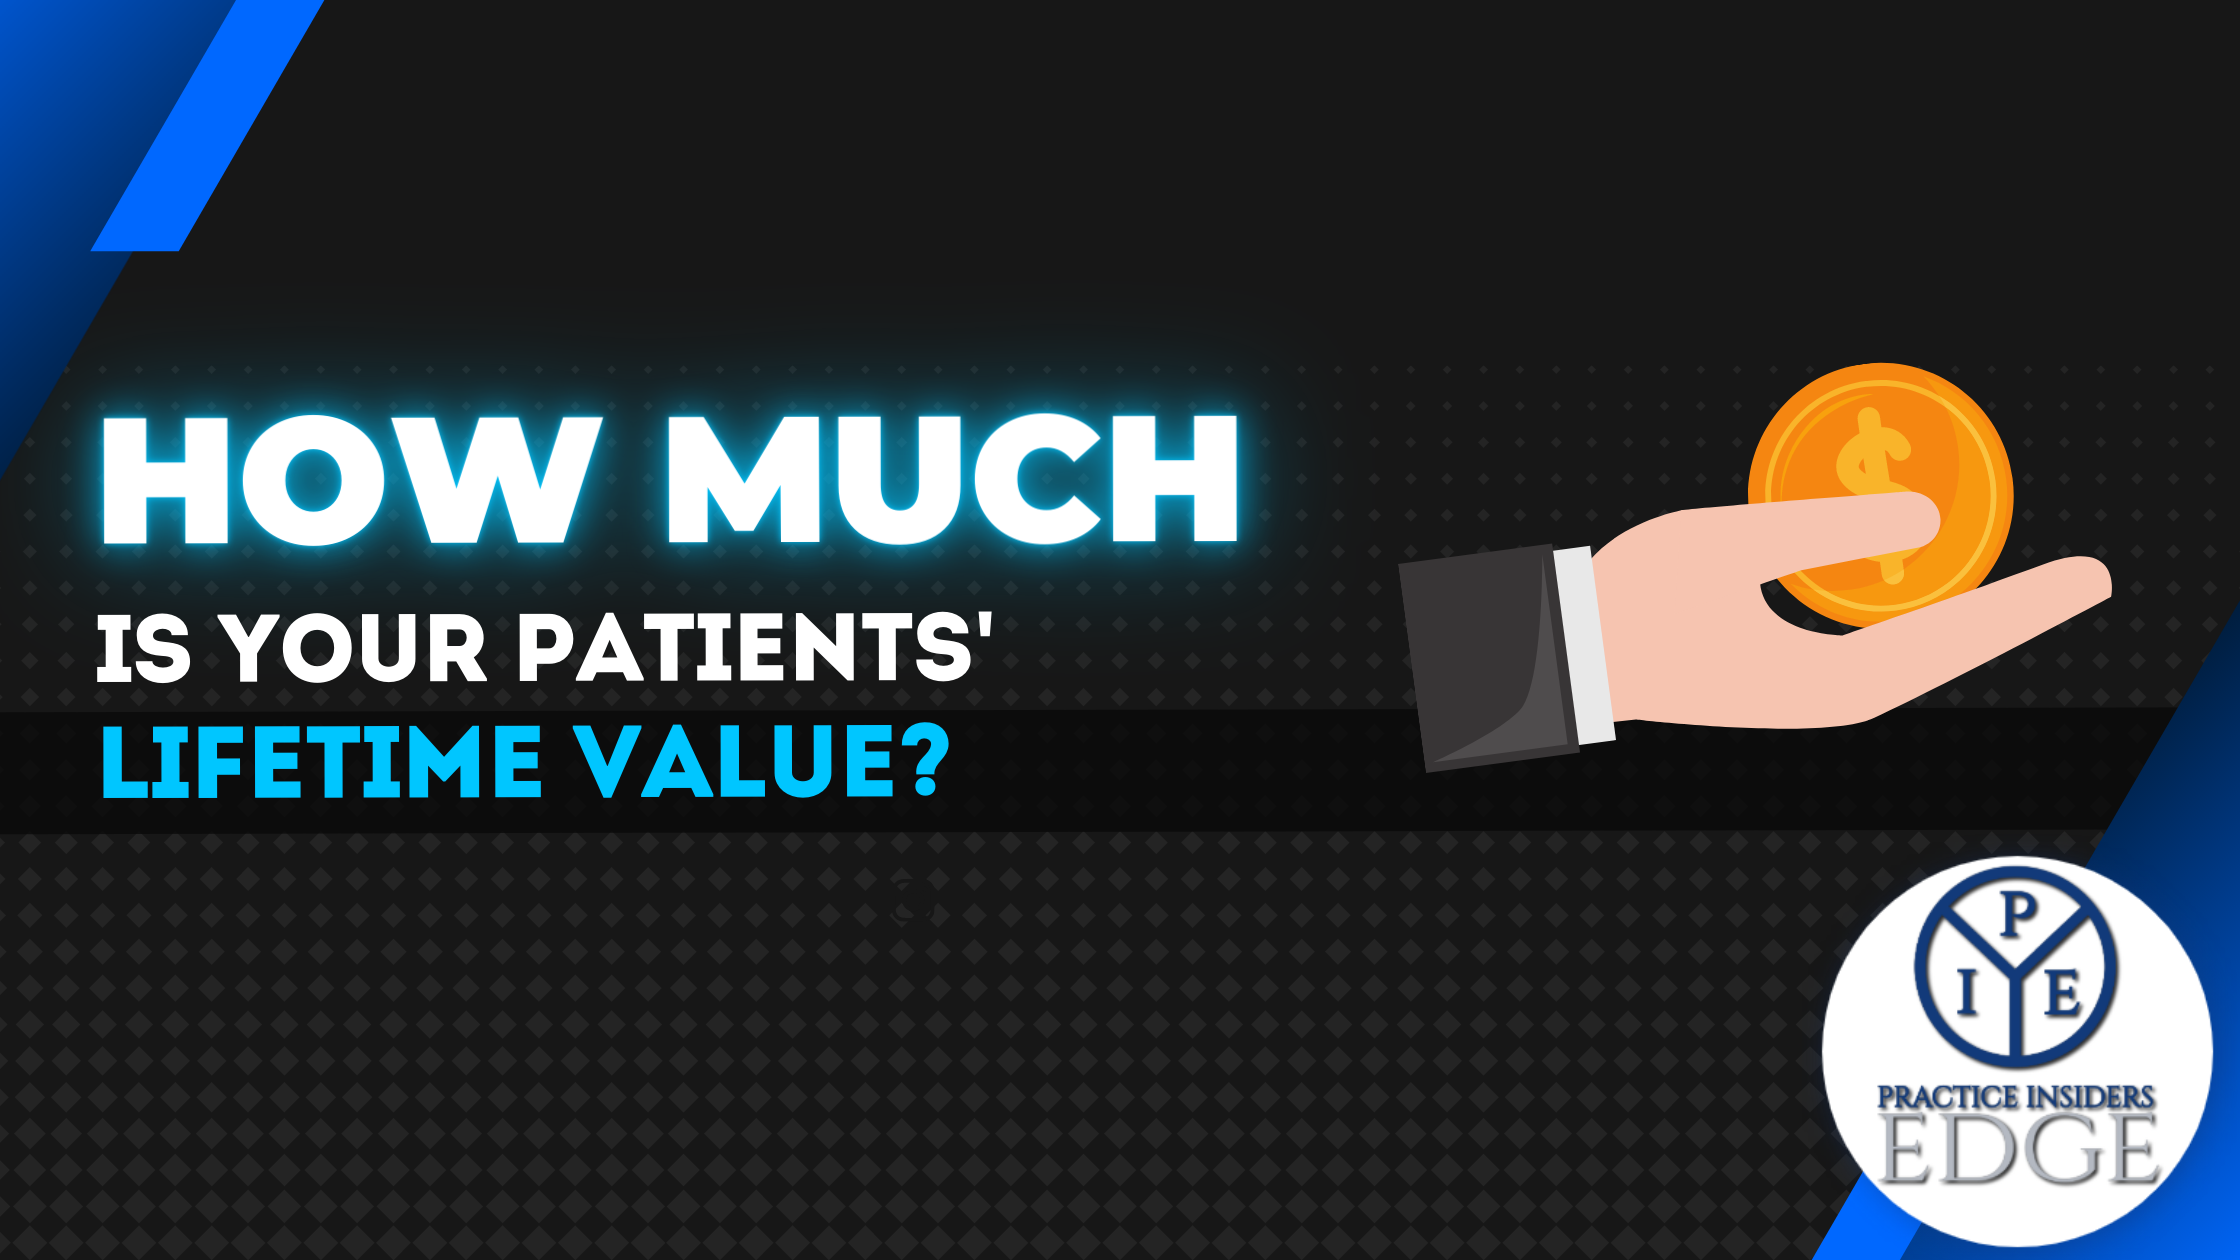 How Much is Your Patients' Lifetime Value (LTV)?